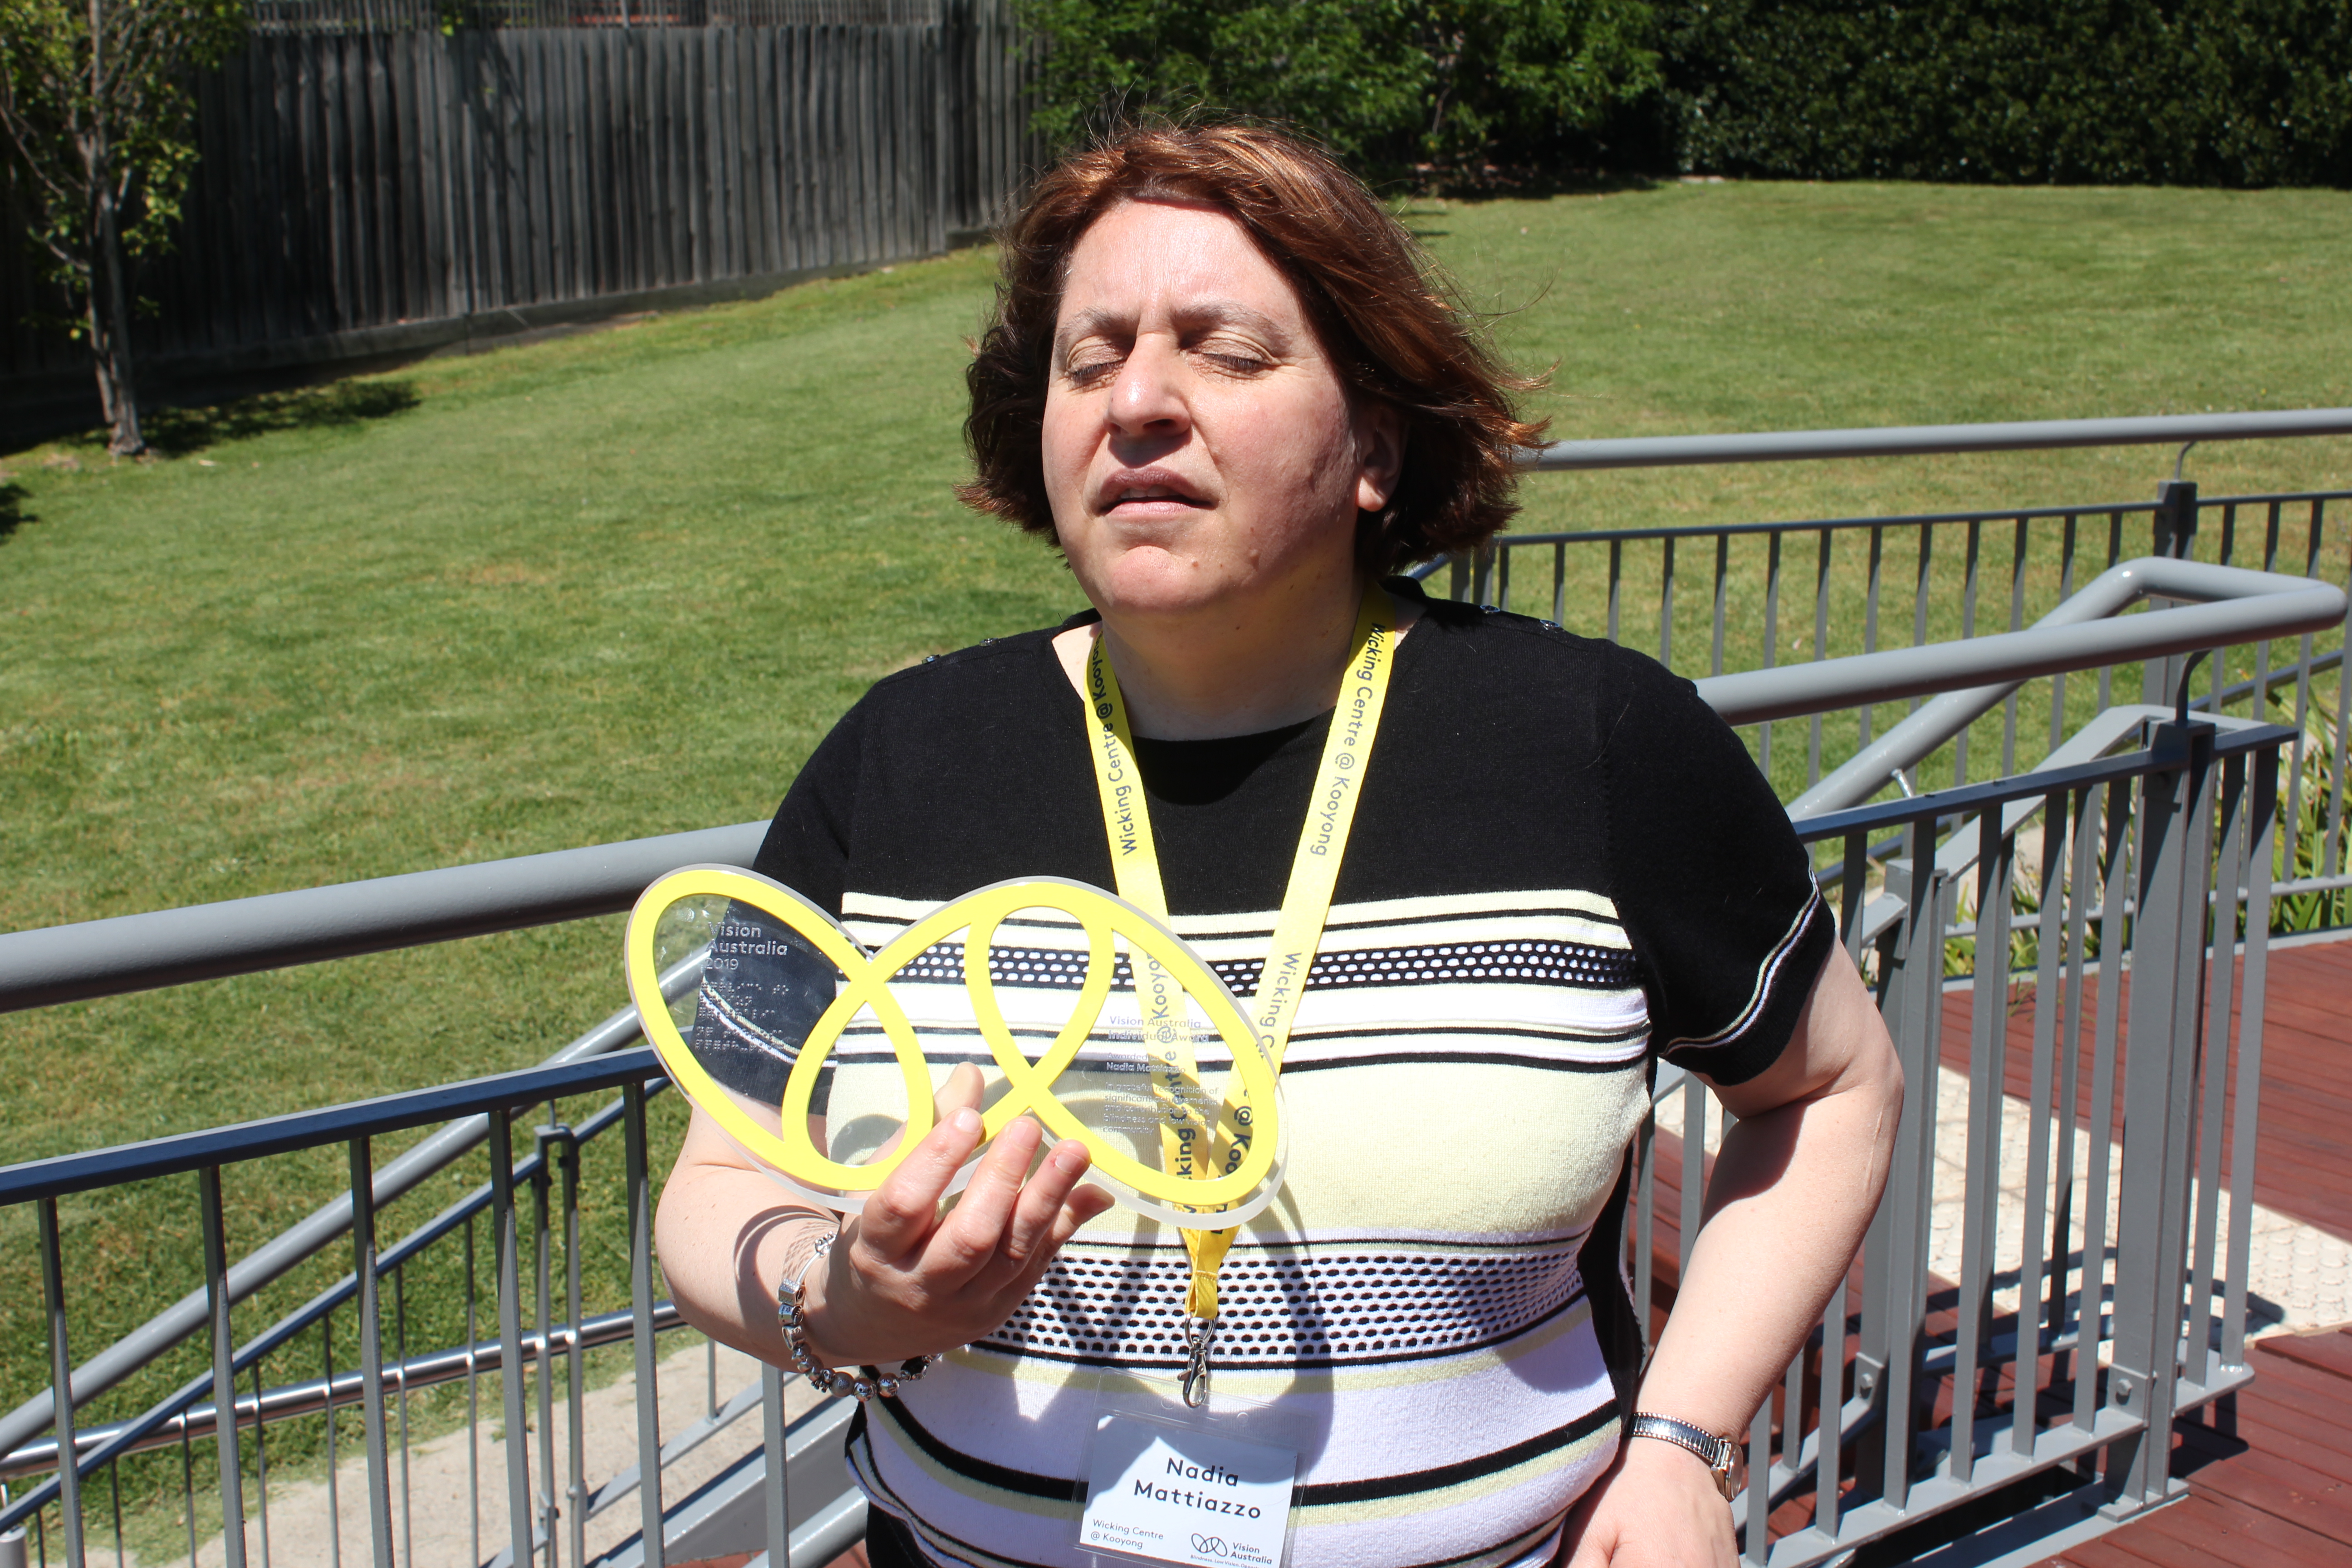 "VA Award winner Nadia, holding her award which takes the shape of the VA logo of 3 yellow ovals linked together"